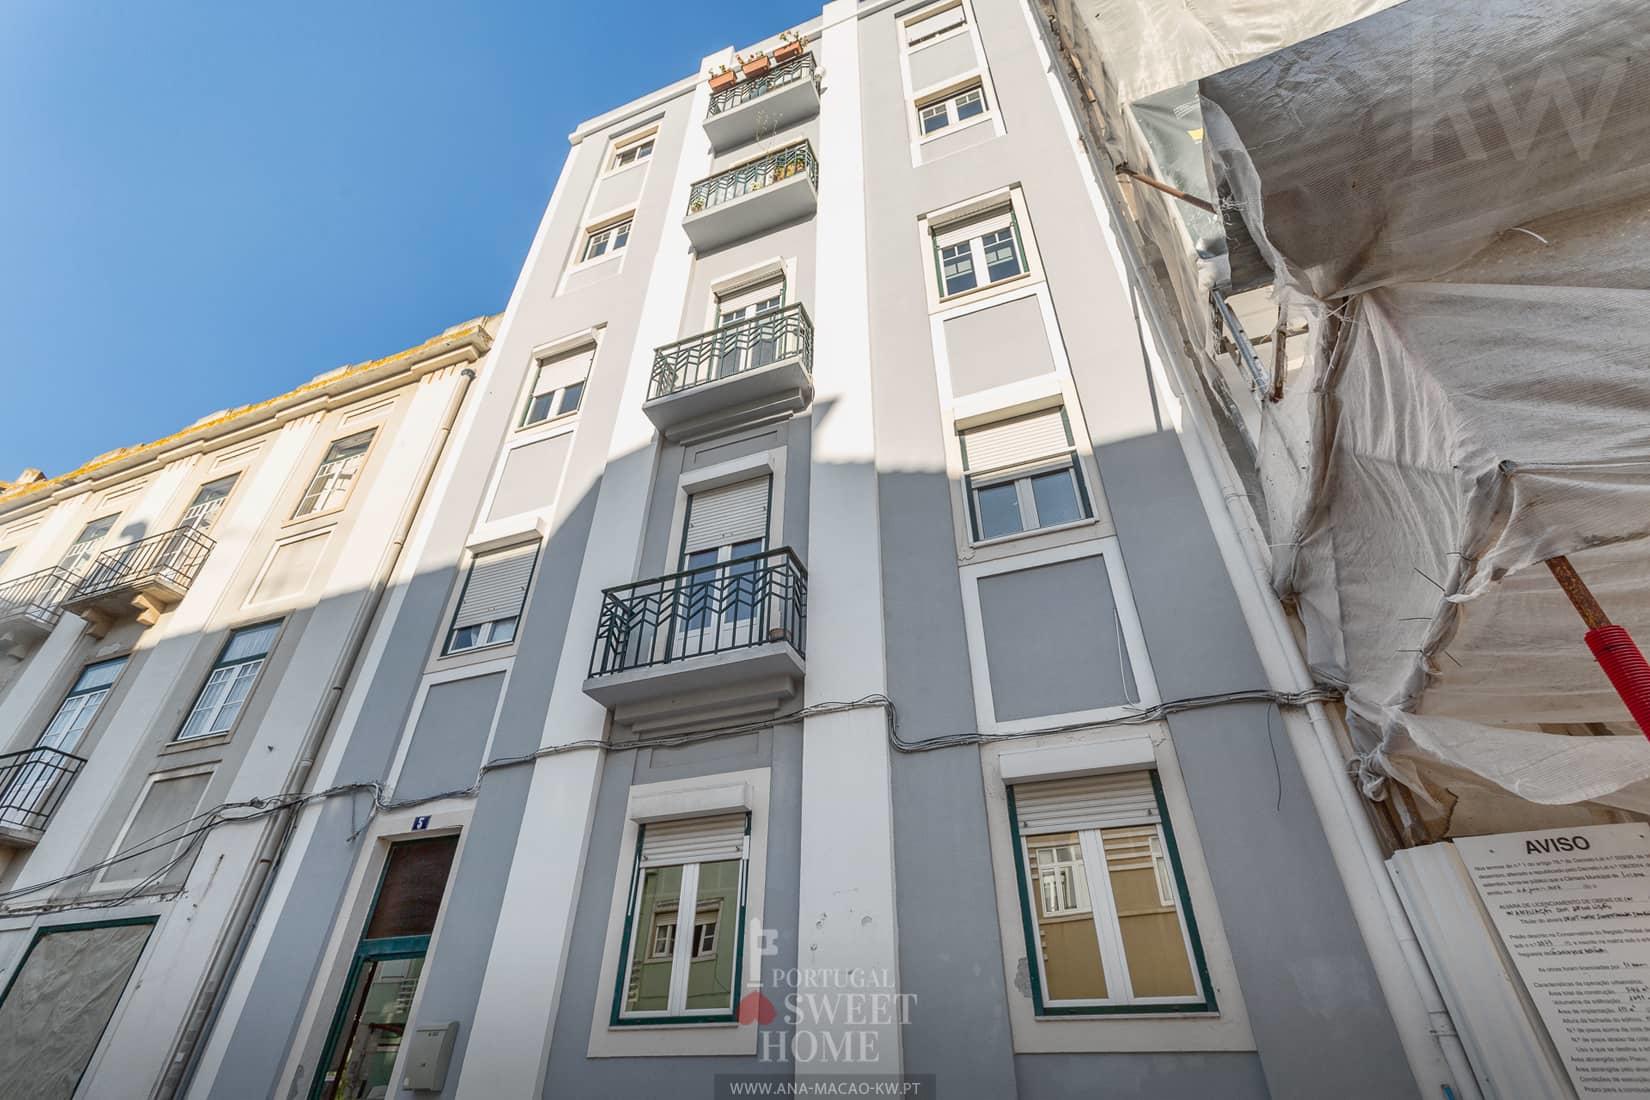 Lisbon, Sete Rios - Completely renovated 3+1 bedroom apartment, for sale